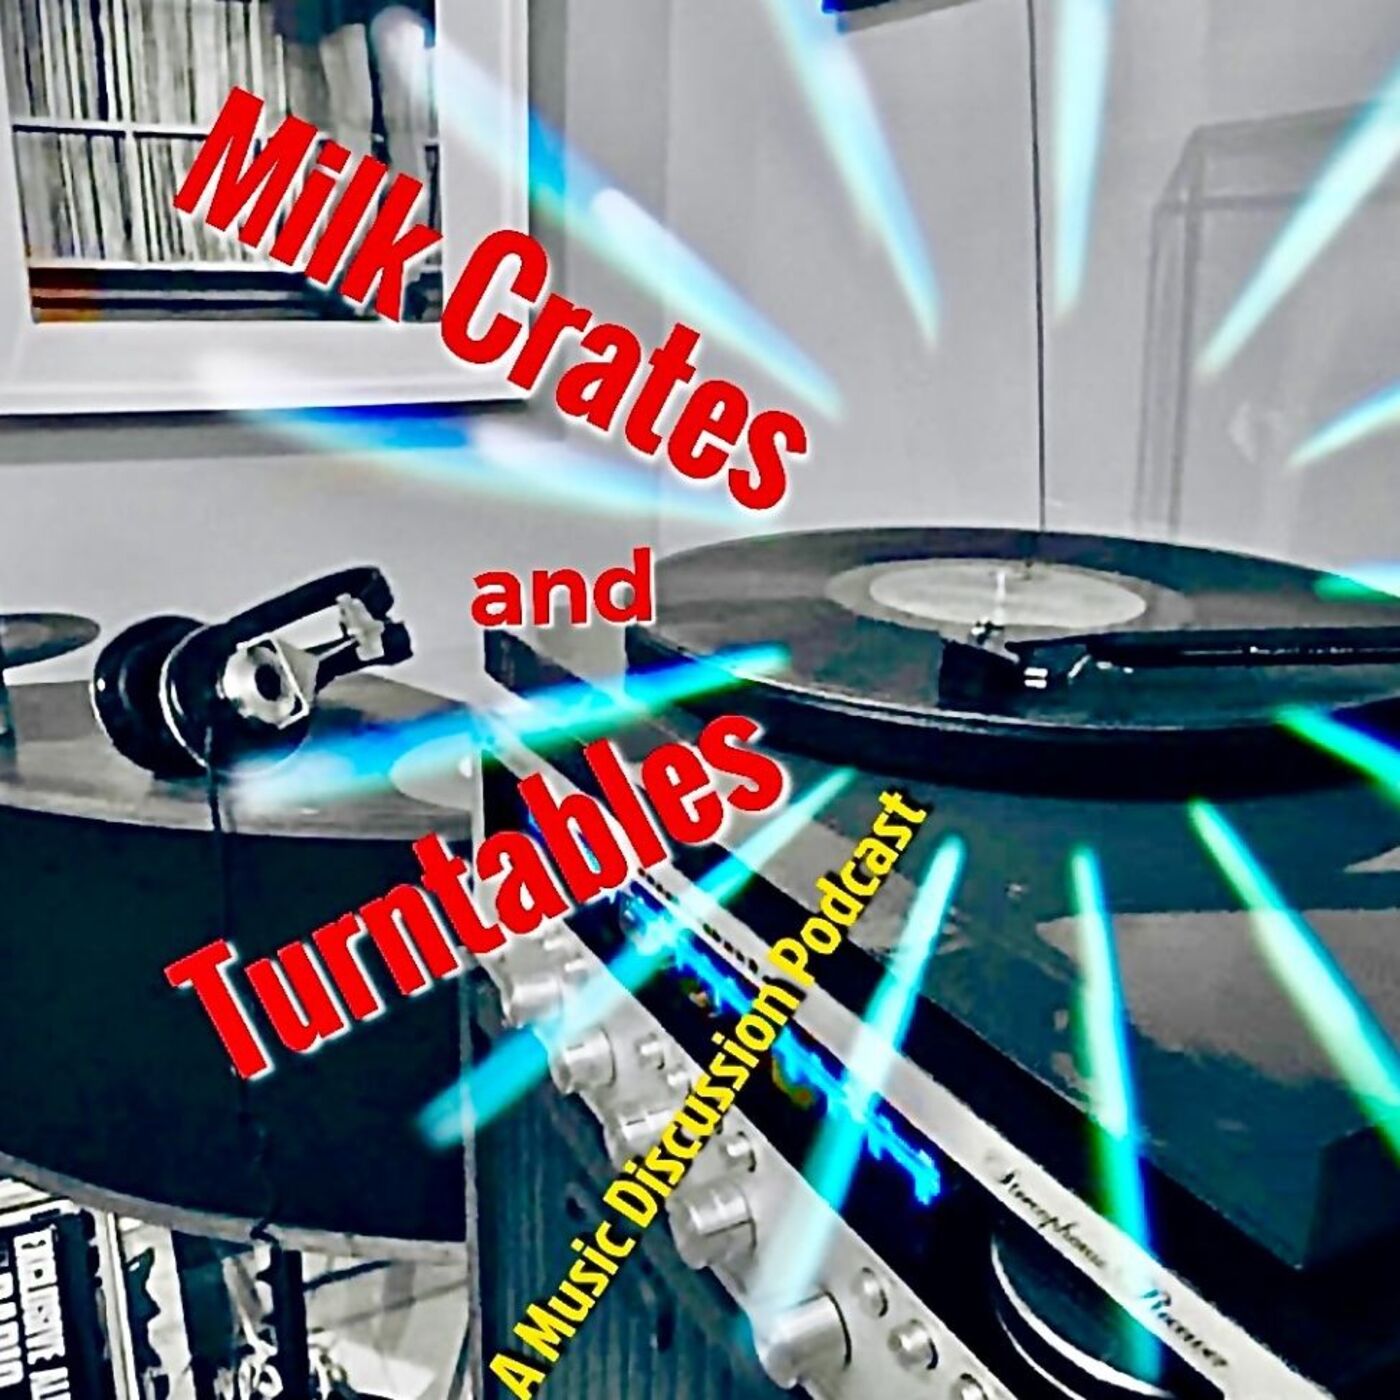 Fresh update on "bueller" discussed on Milk Crates and Turntables. A Music Discussion Podcast